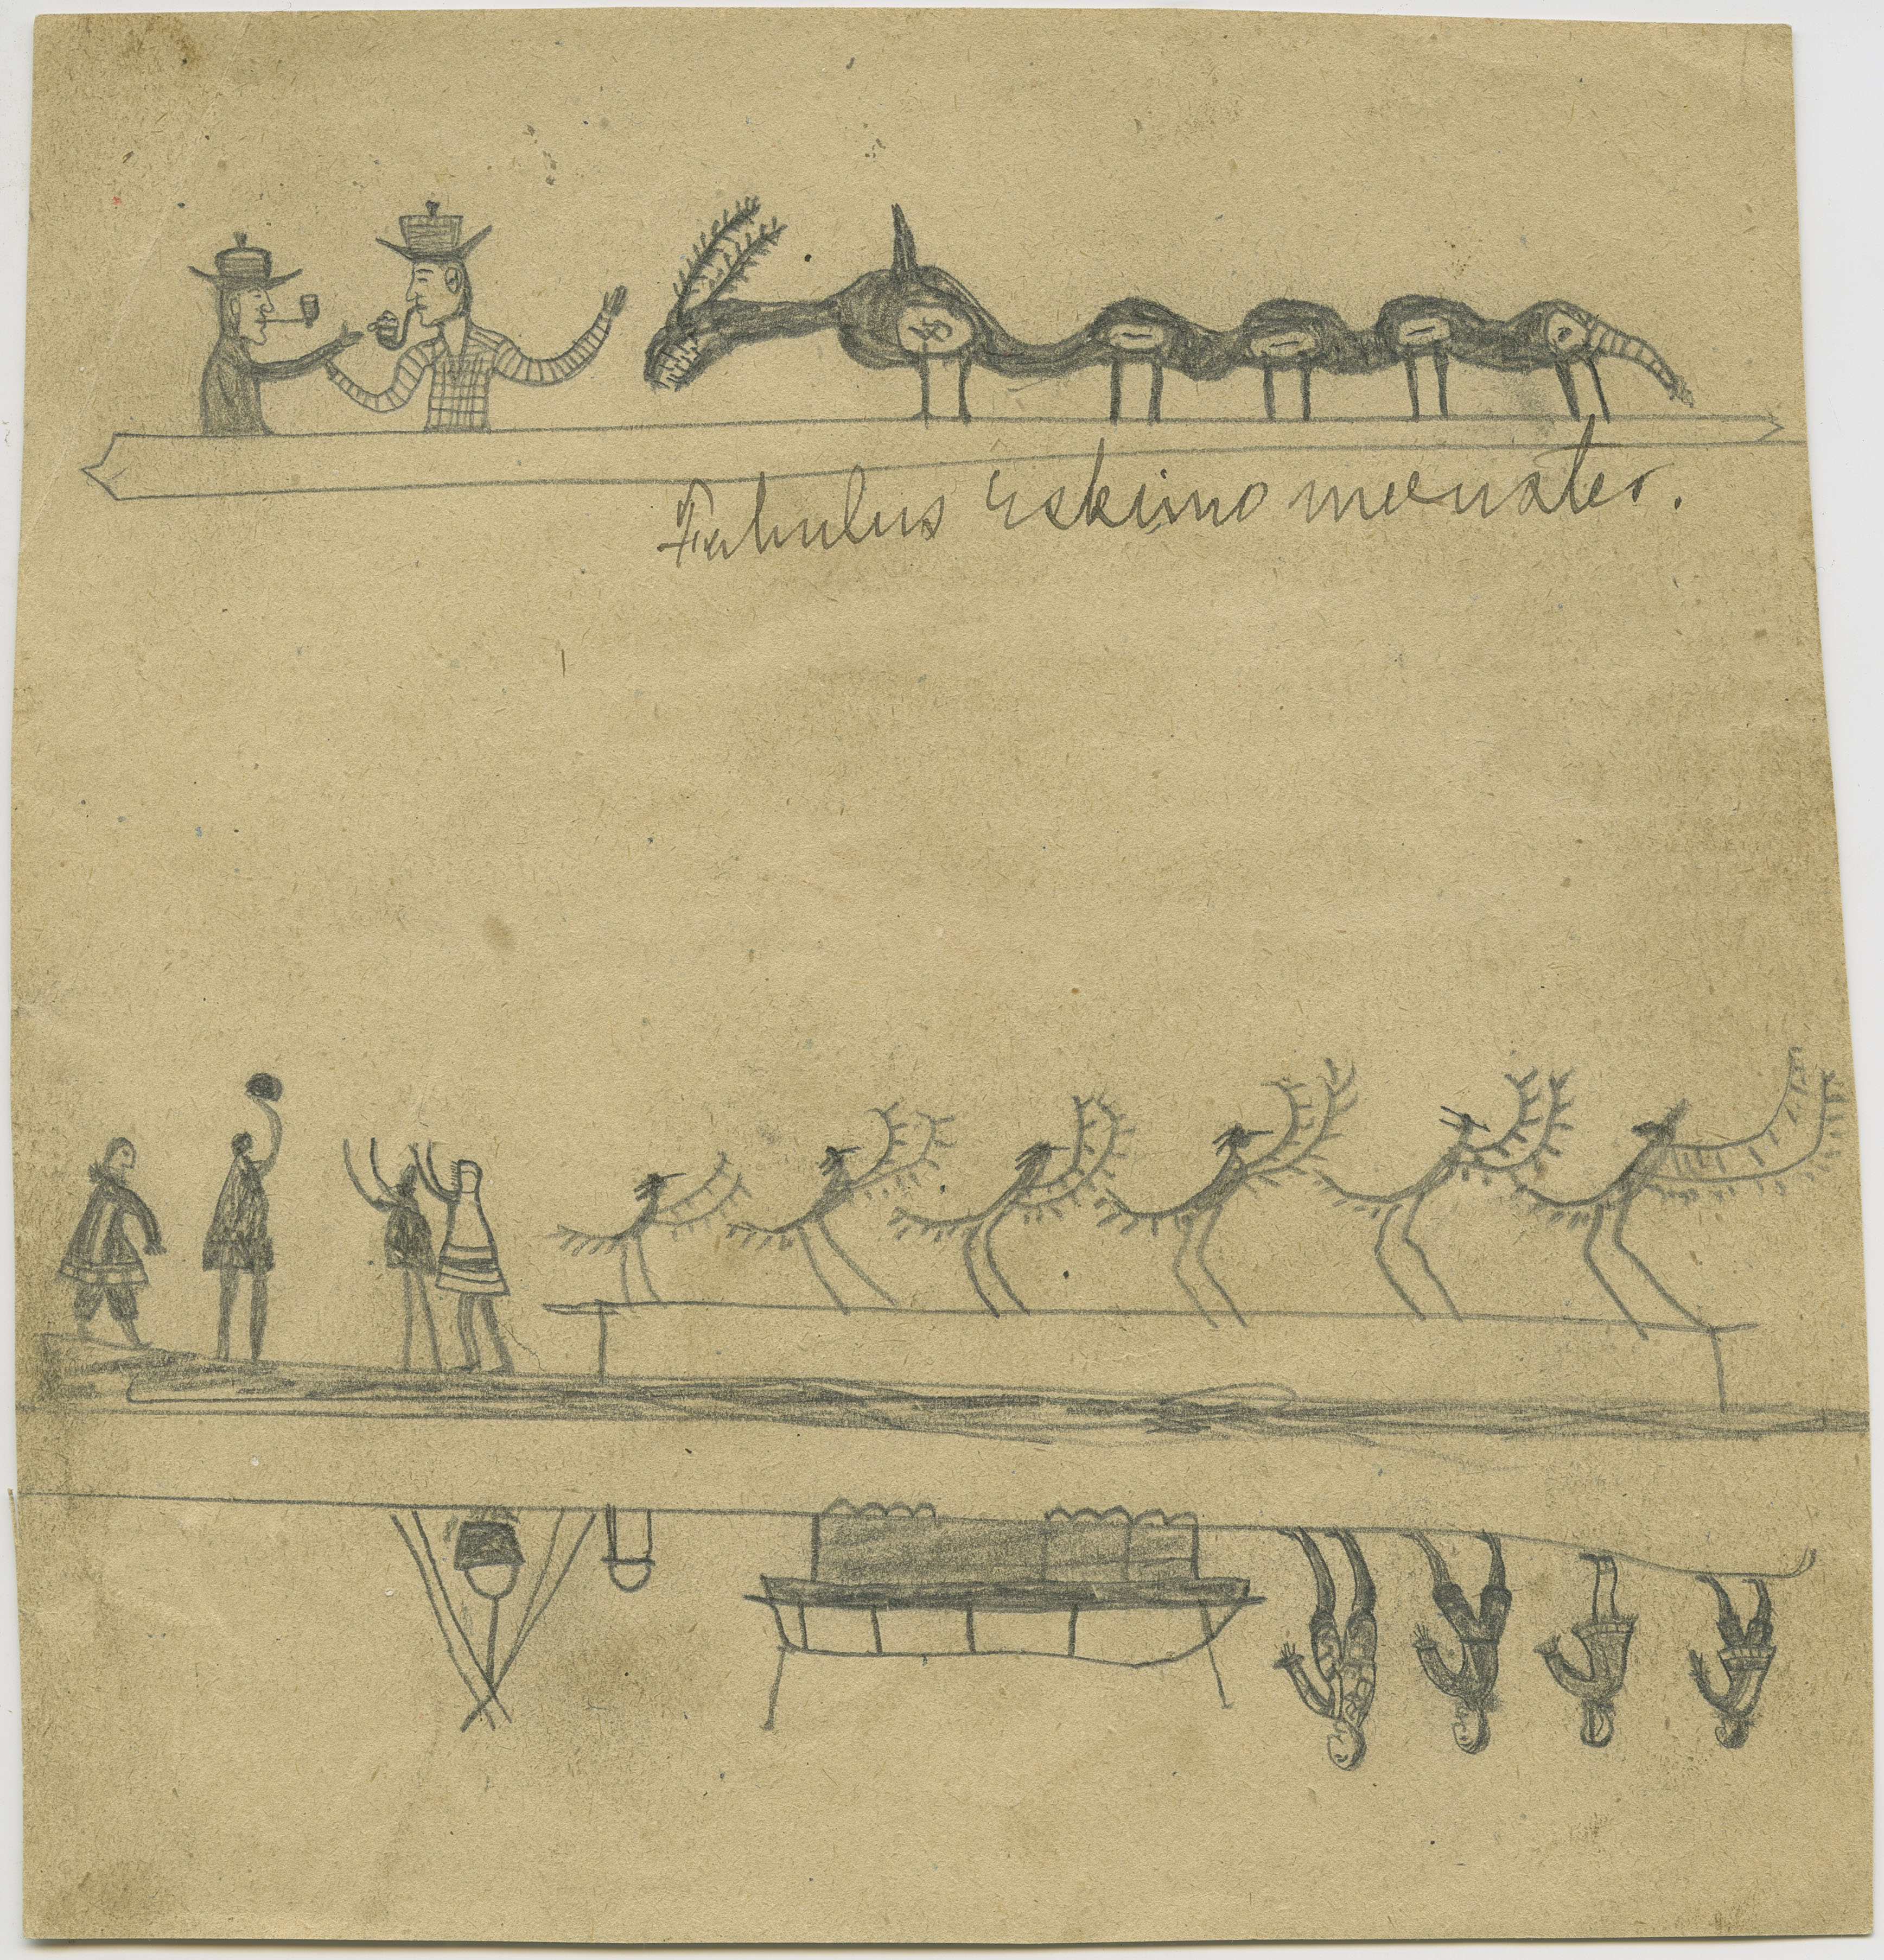 Unidentified Iñupiat Artist, Fabulous Eskimo Monsters, and Fabulous Eskimo Monster/four men with sledge and cooking fire/row of six birds, Siuġaq (Cape Prince of Wales), Alaska, 1892-1893. Graphite on paper. Museum purchase, Thornton Collection. 